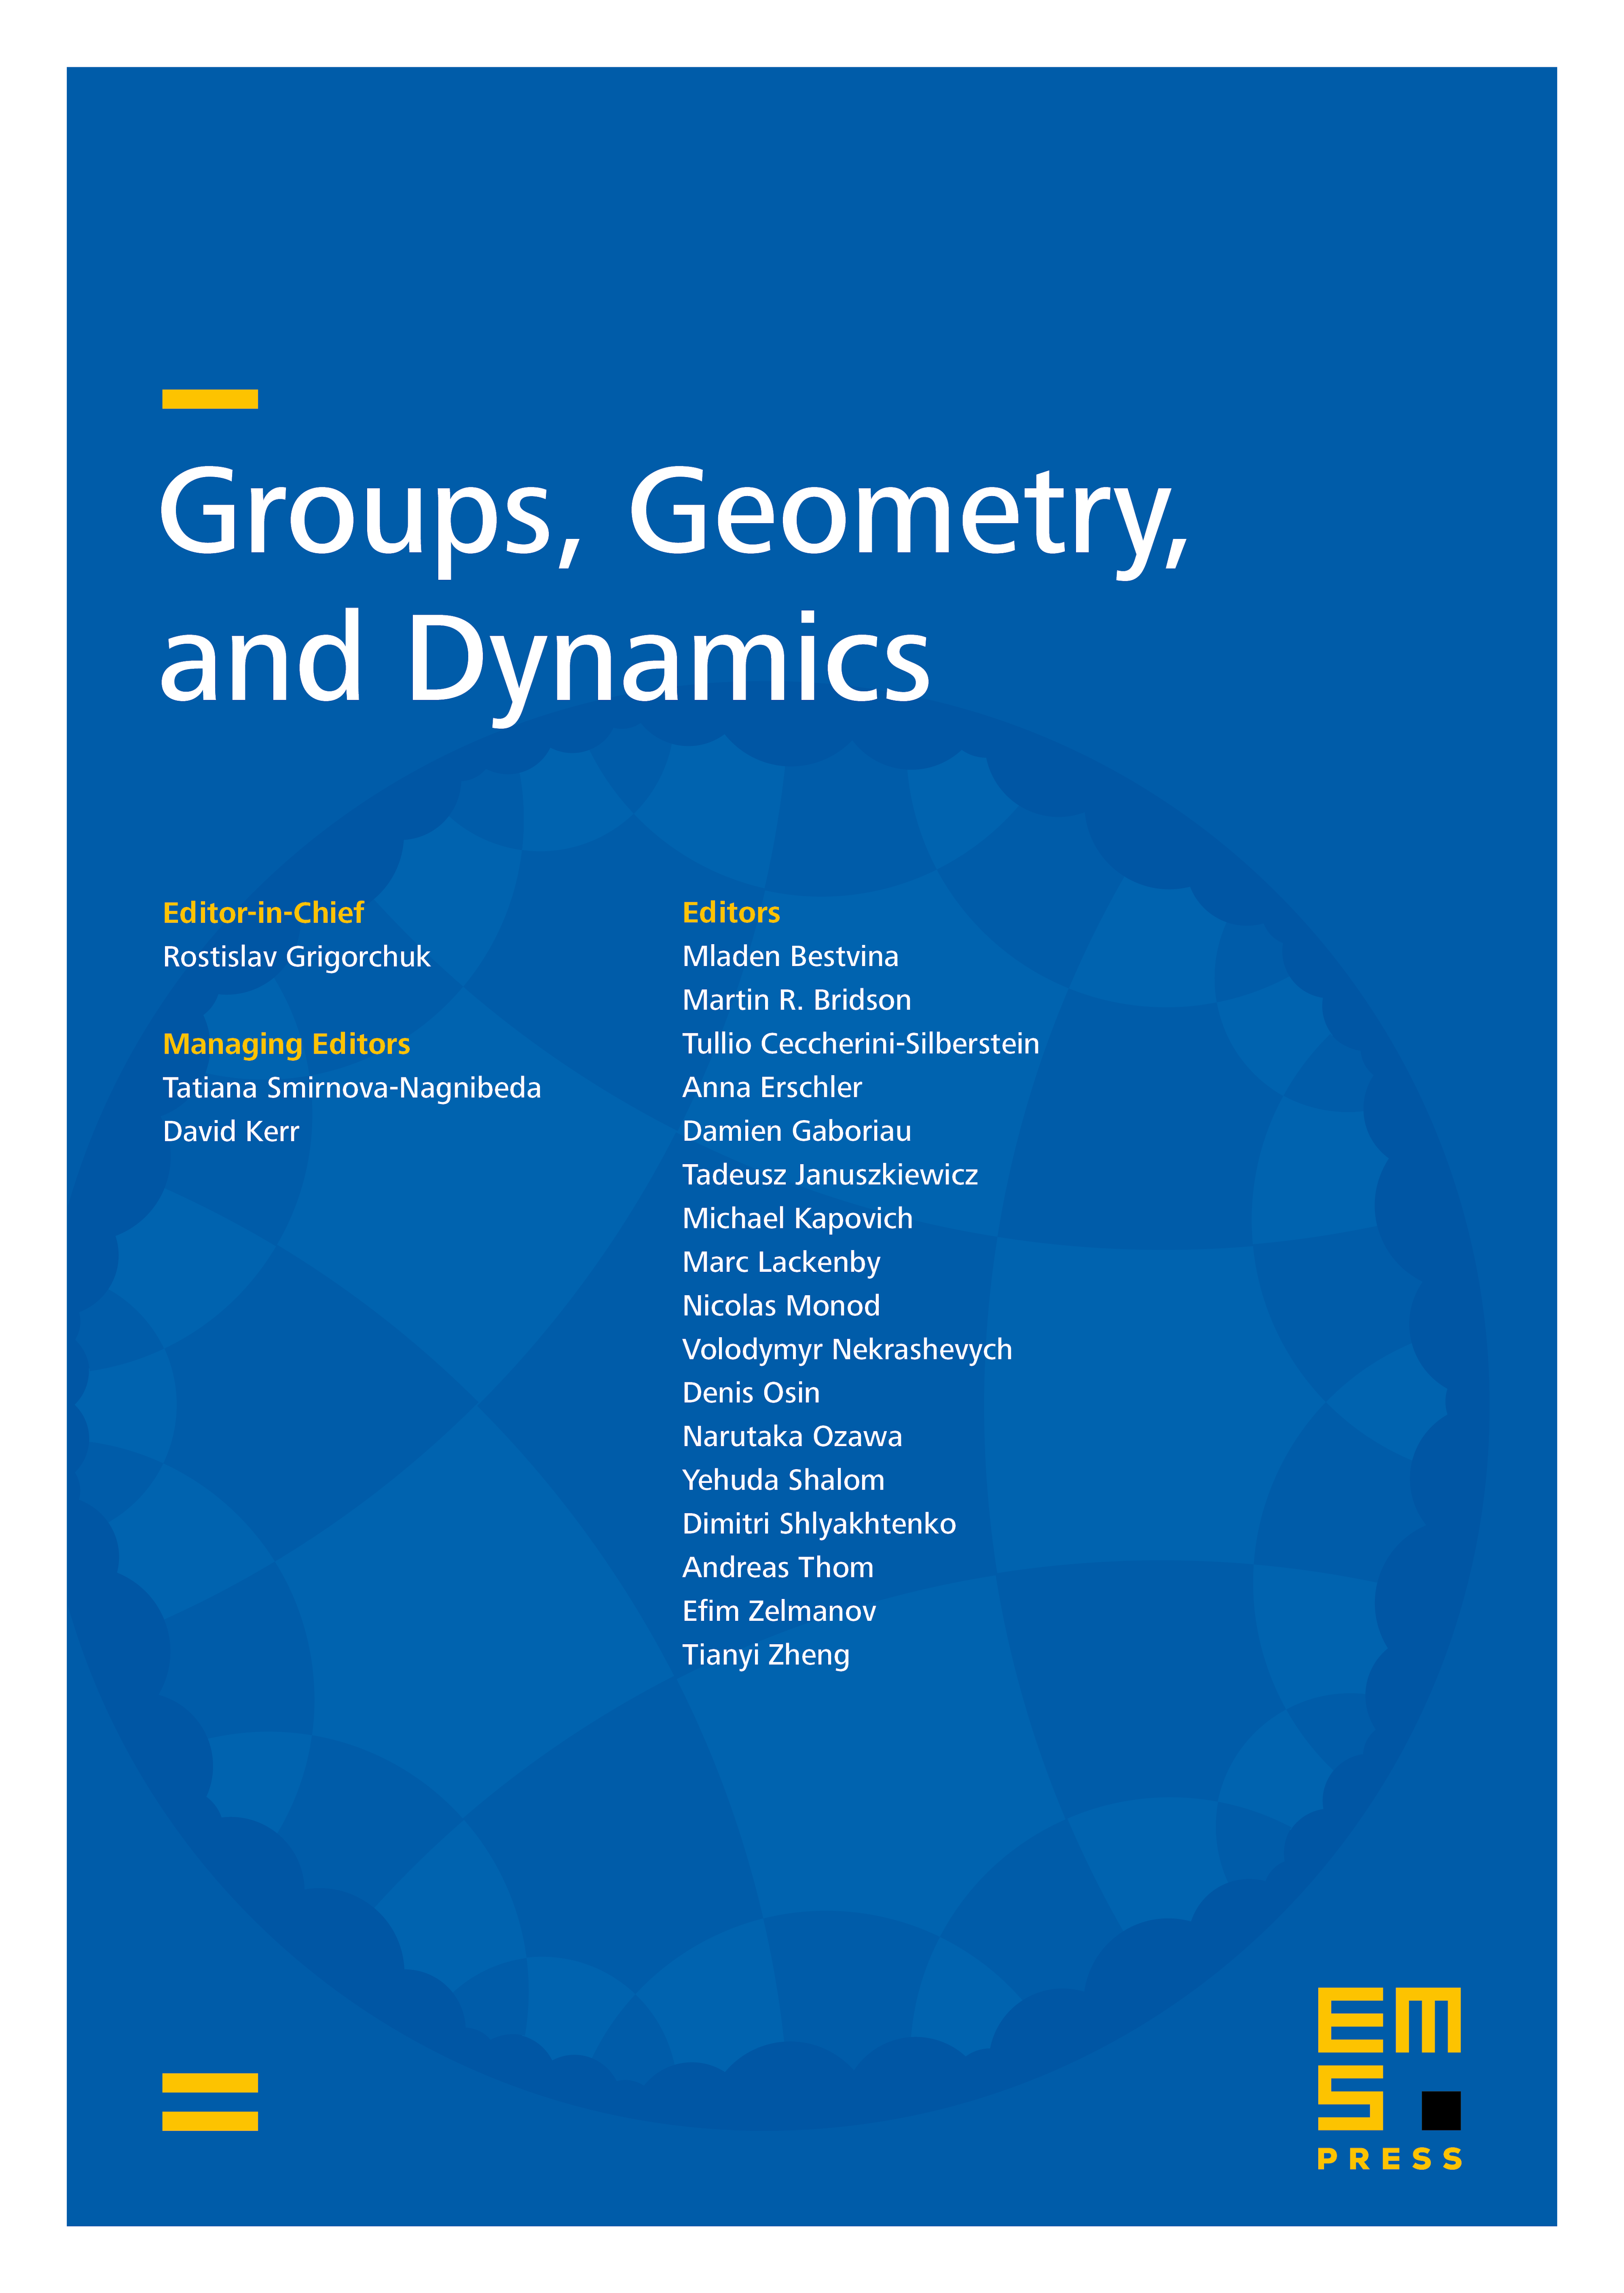 A characterization of hyperbolic spaces cover